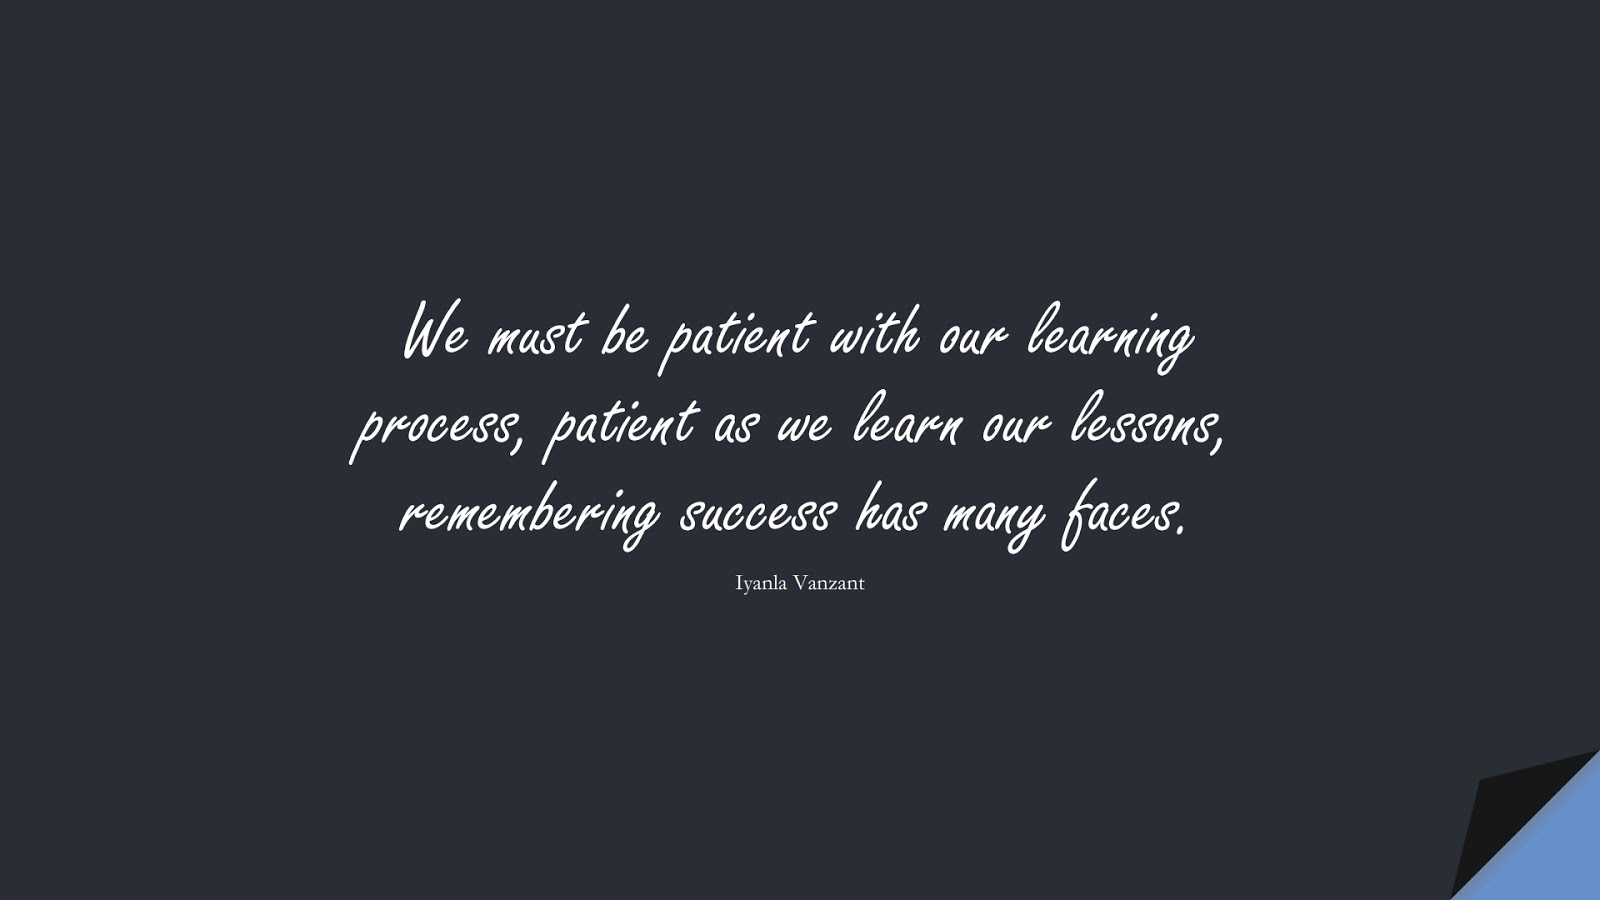 We must be patient with our learning process, patient as we learn our lessons, remembering success has many faces. (Iyanla Vanzant);  #BeingStrongQuotes